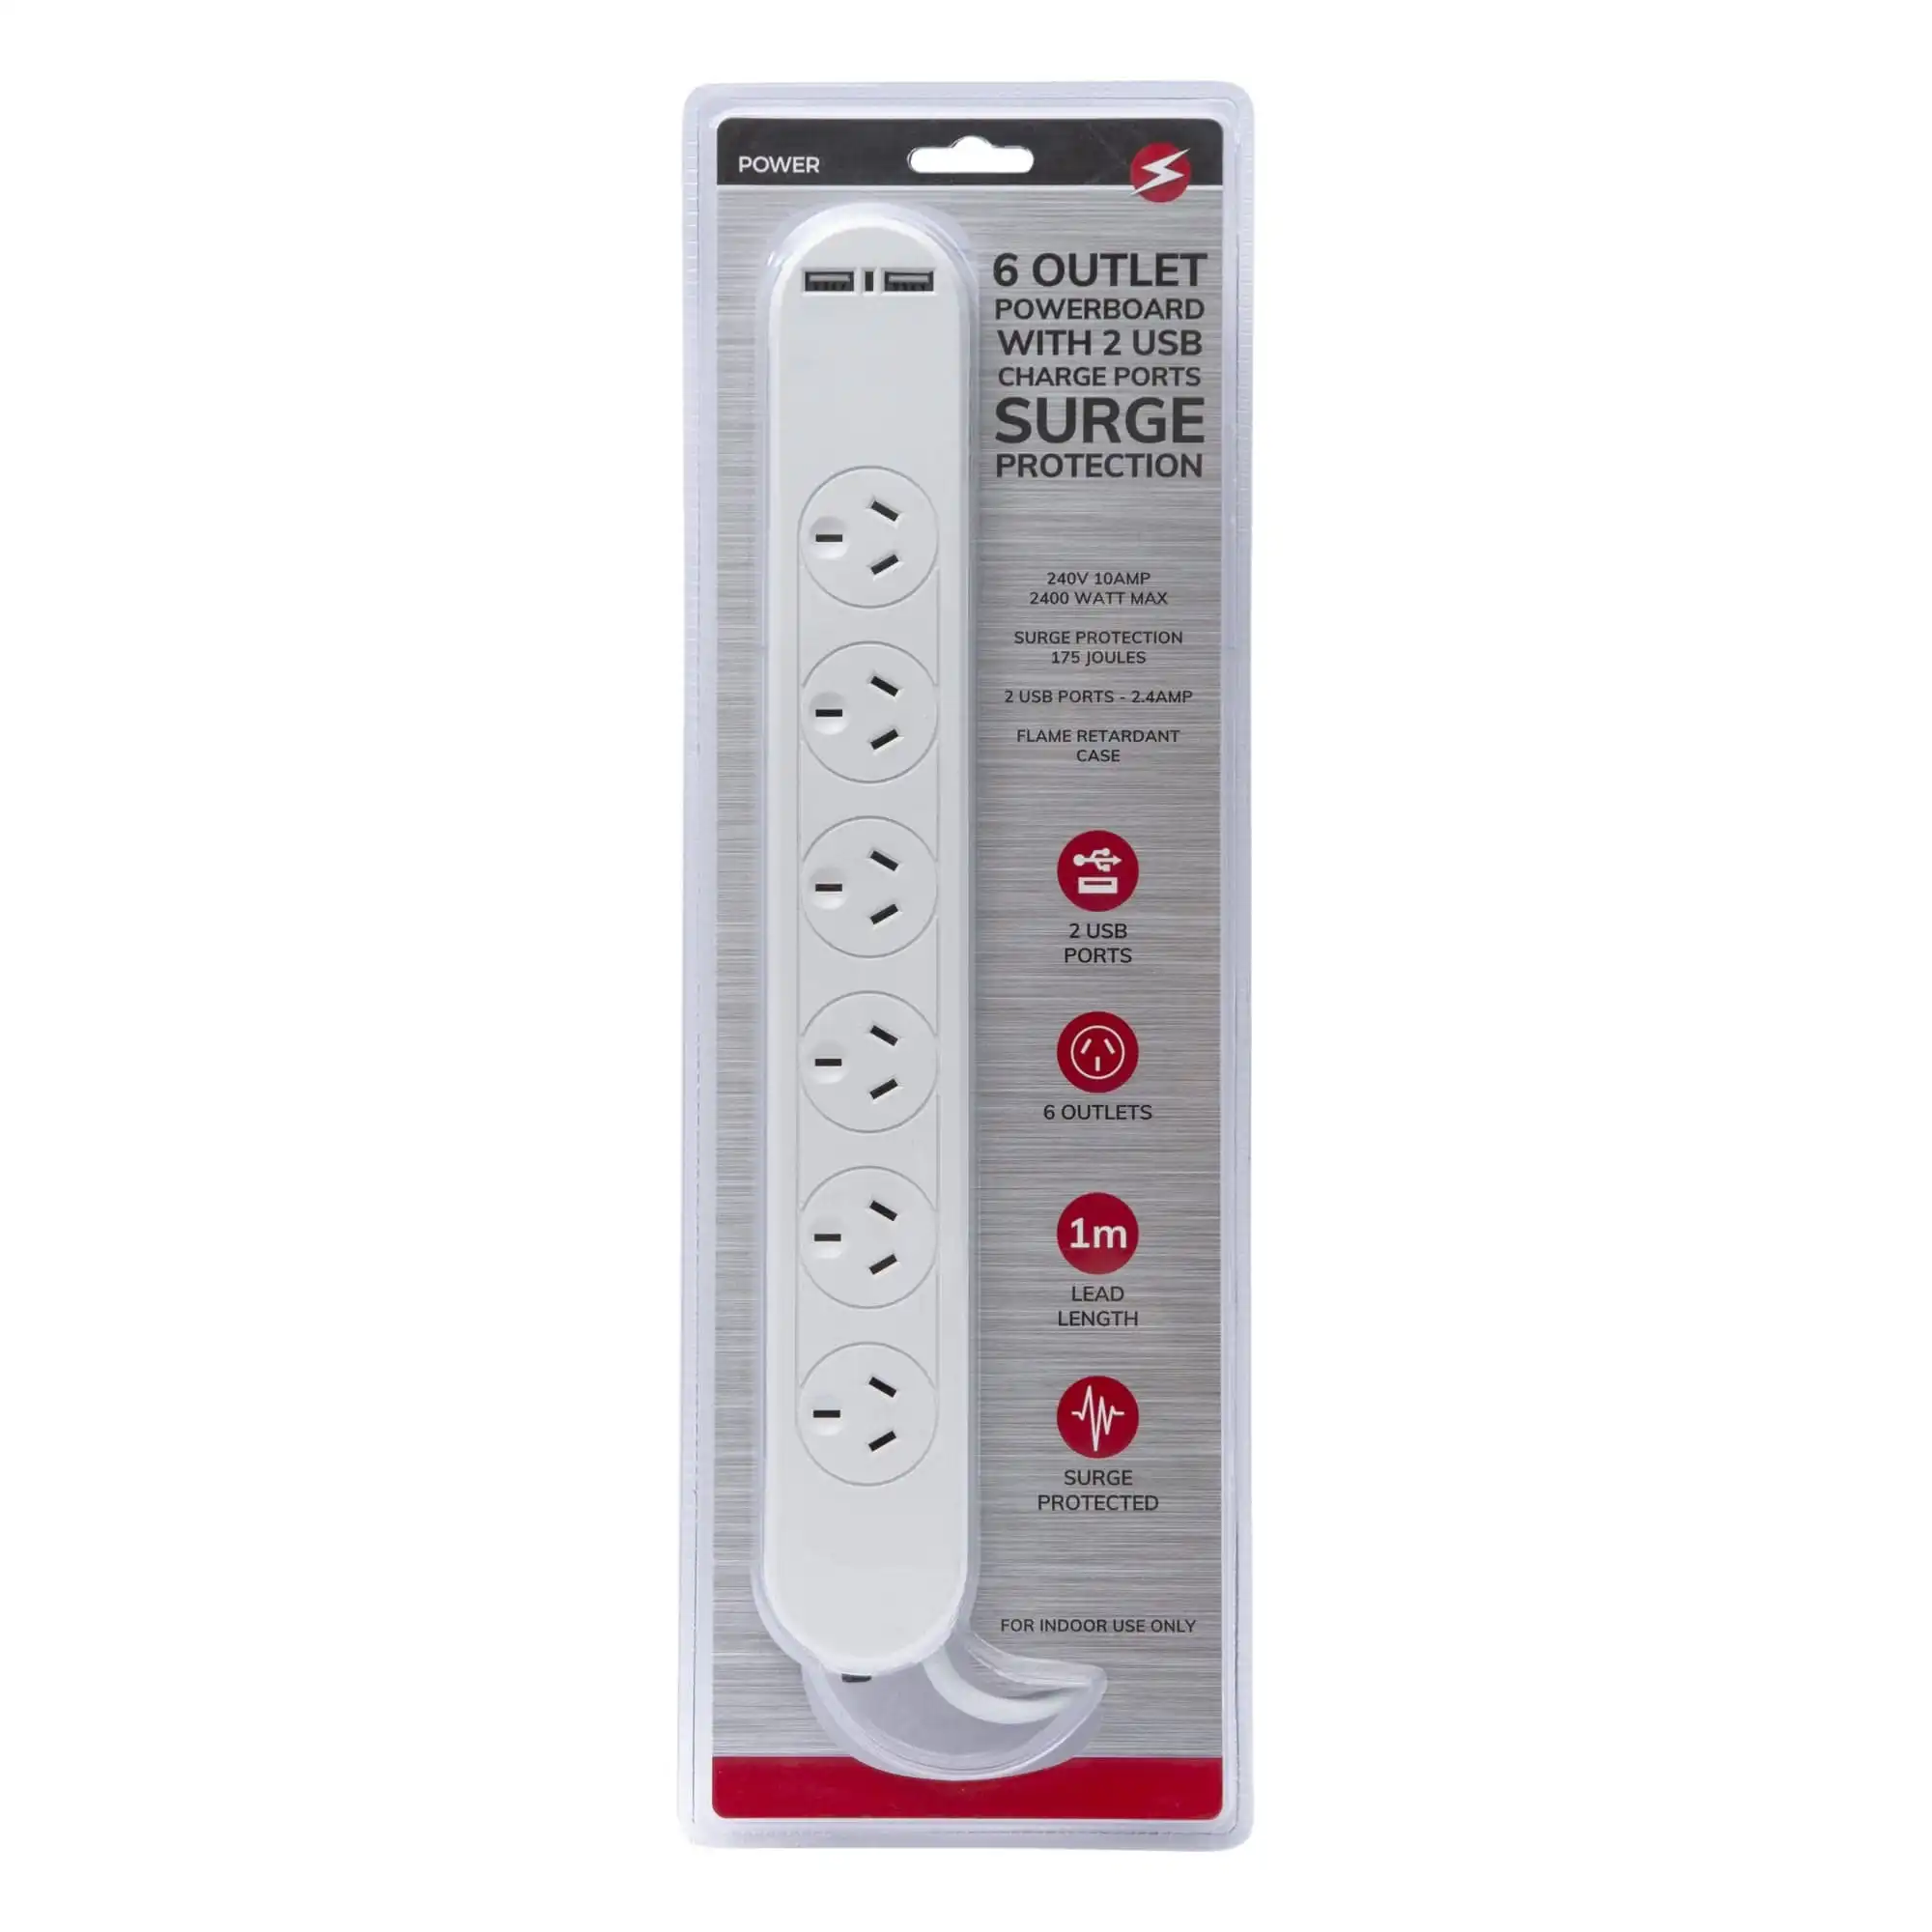 6 Outlet Powerboard With Surge Protection and Dual USB Charger